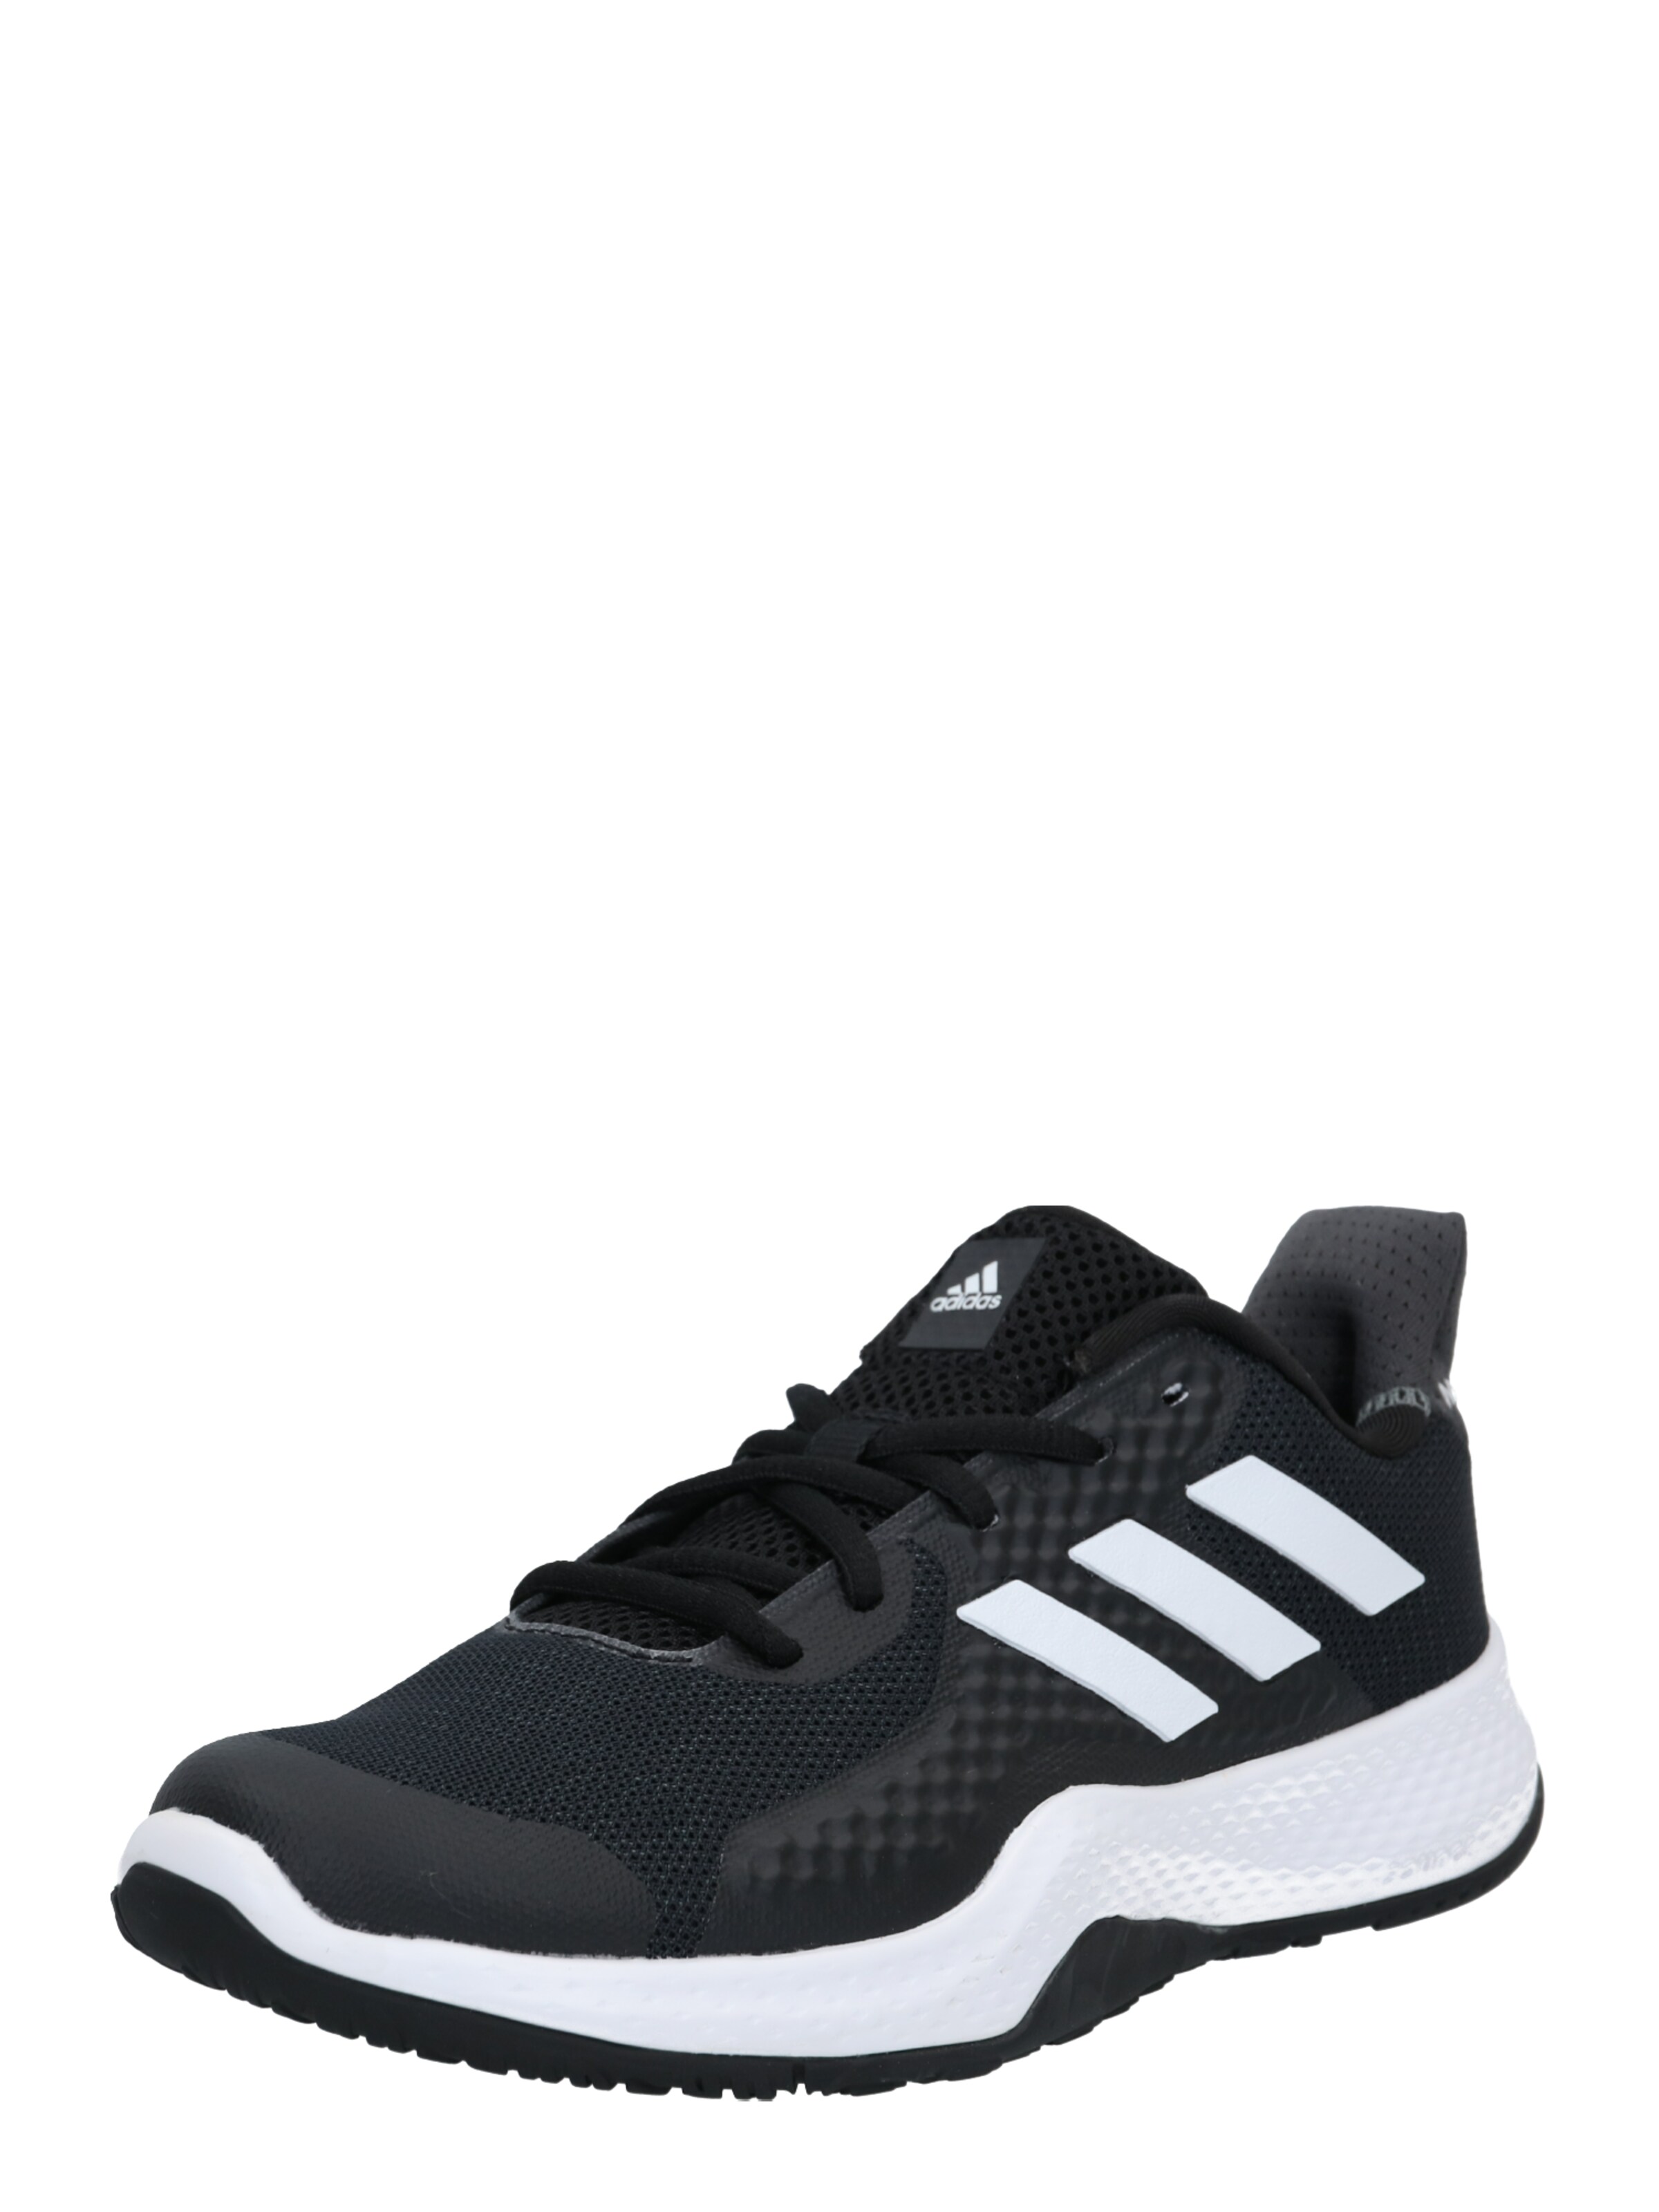 adidas fitbounce trainers womens